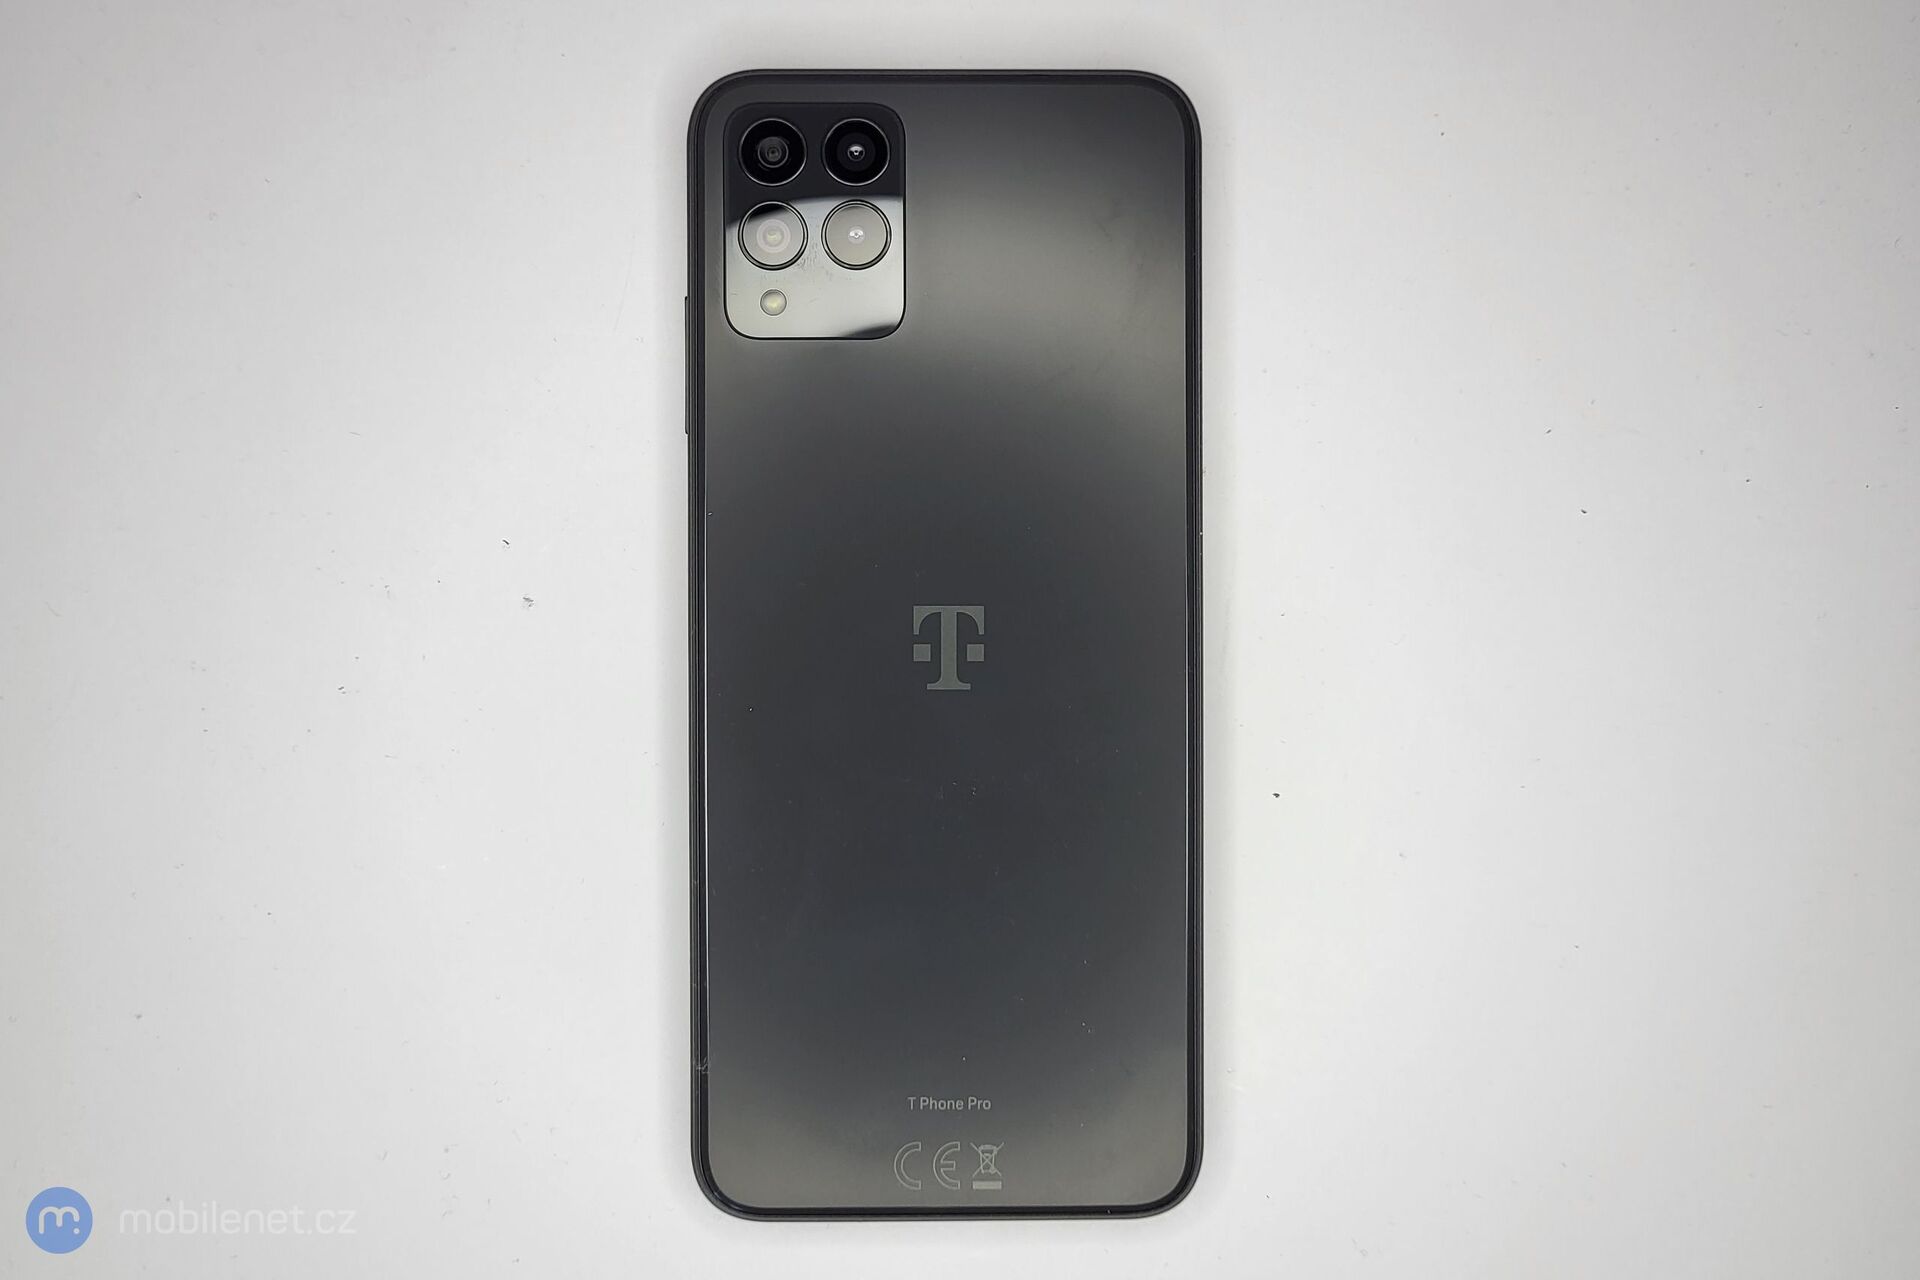 T-Mobile T Phone Pro